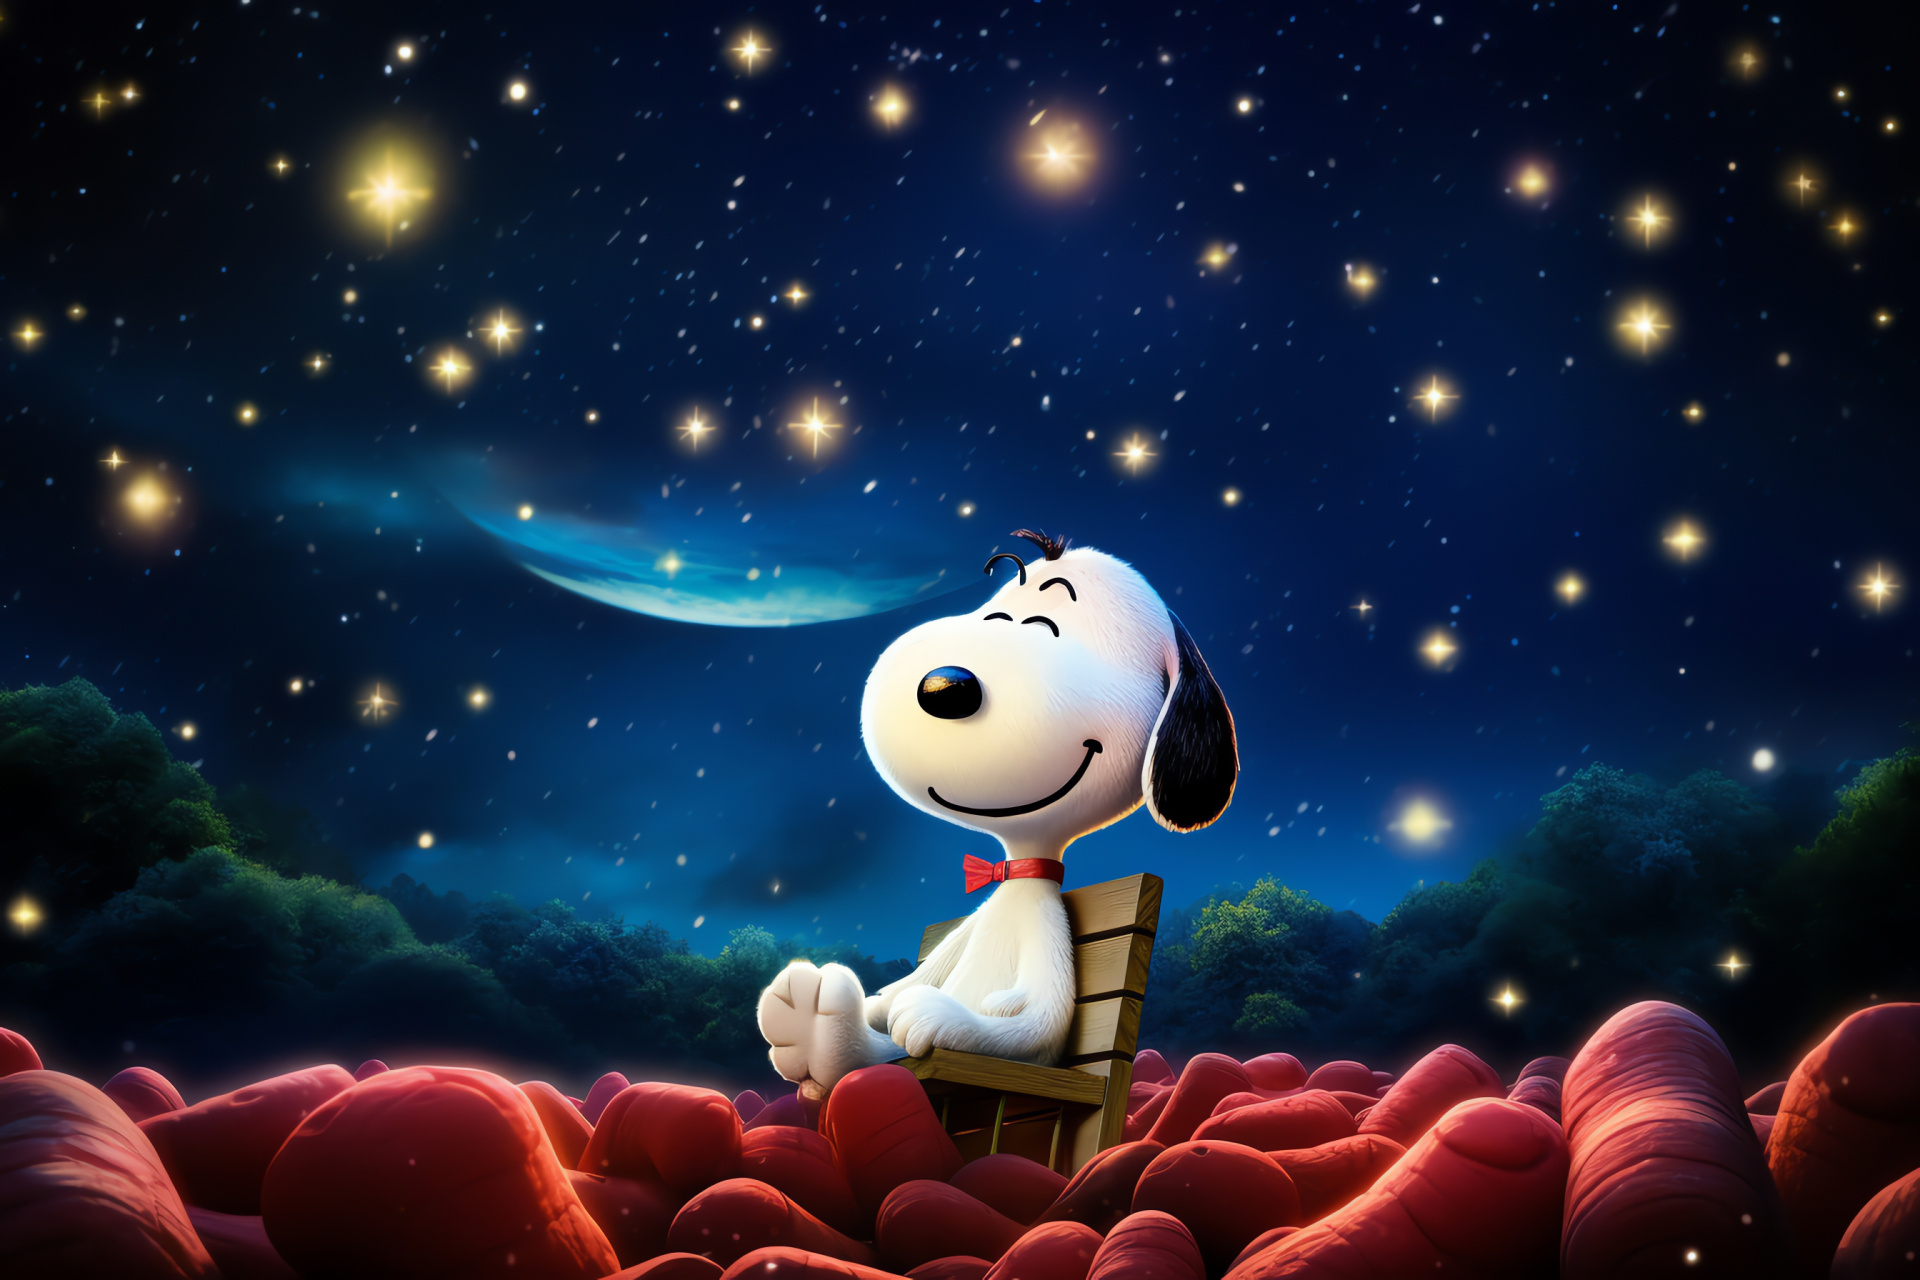 Snoopy evening entertainment, Peanuts characters, Star-studded event, Summertime cinema, Open air film, HD Desktop Wallpaper